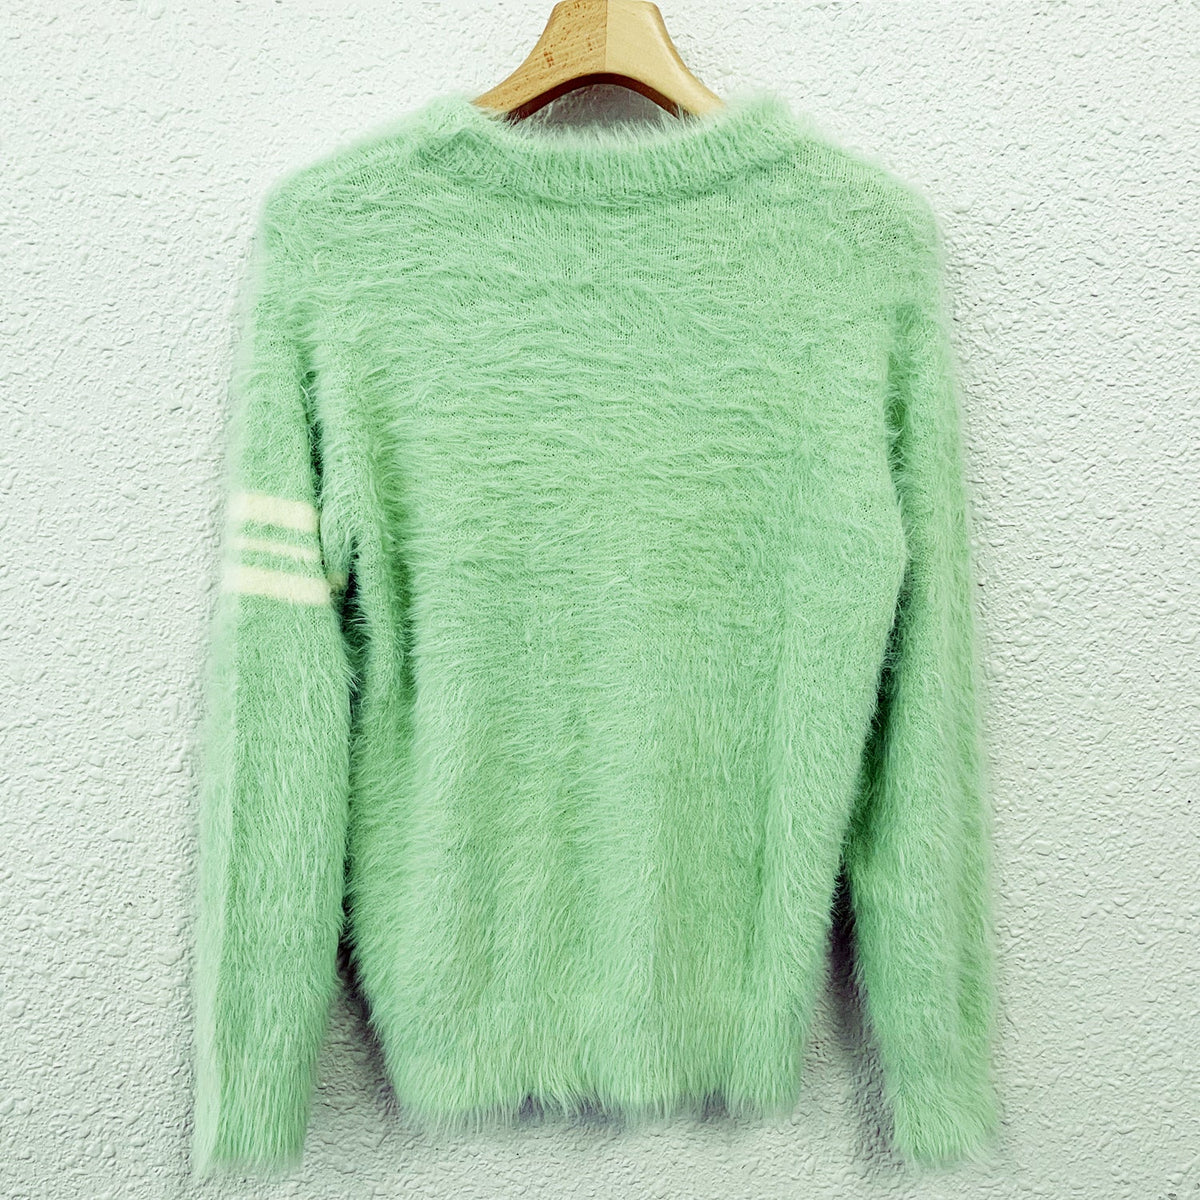 Fur knit pull over / MINT GREENなっています